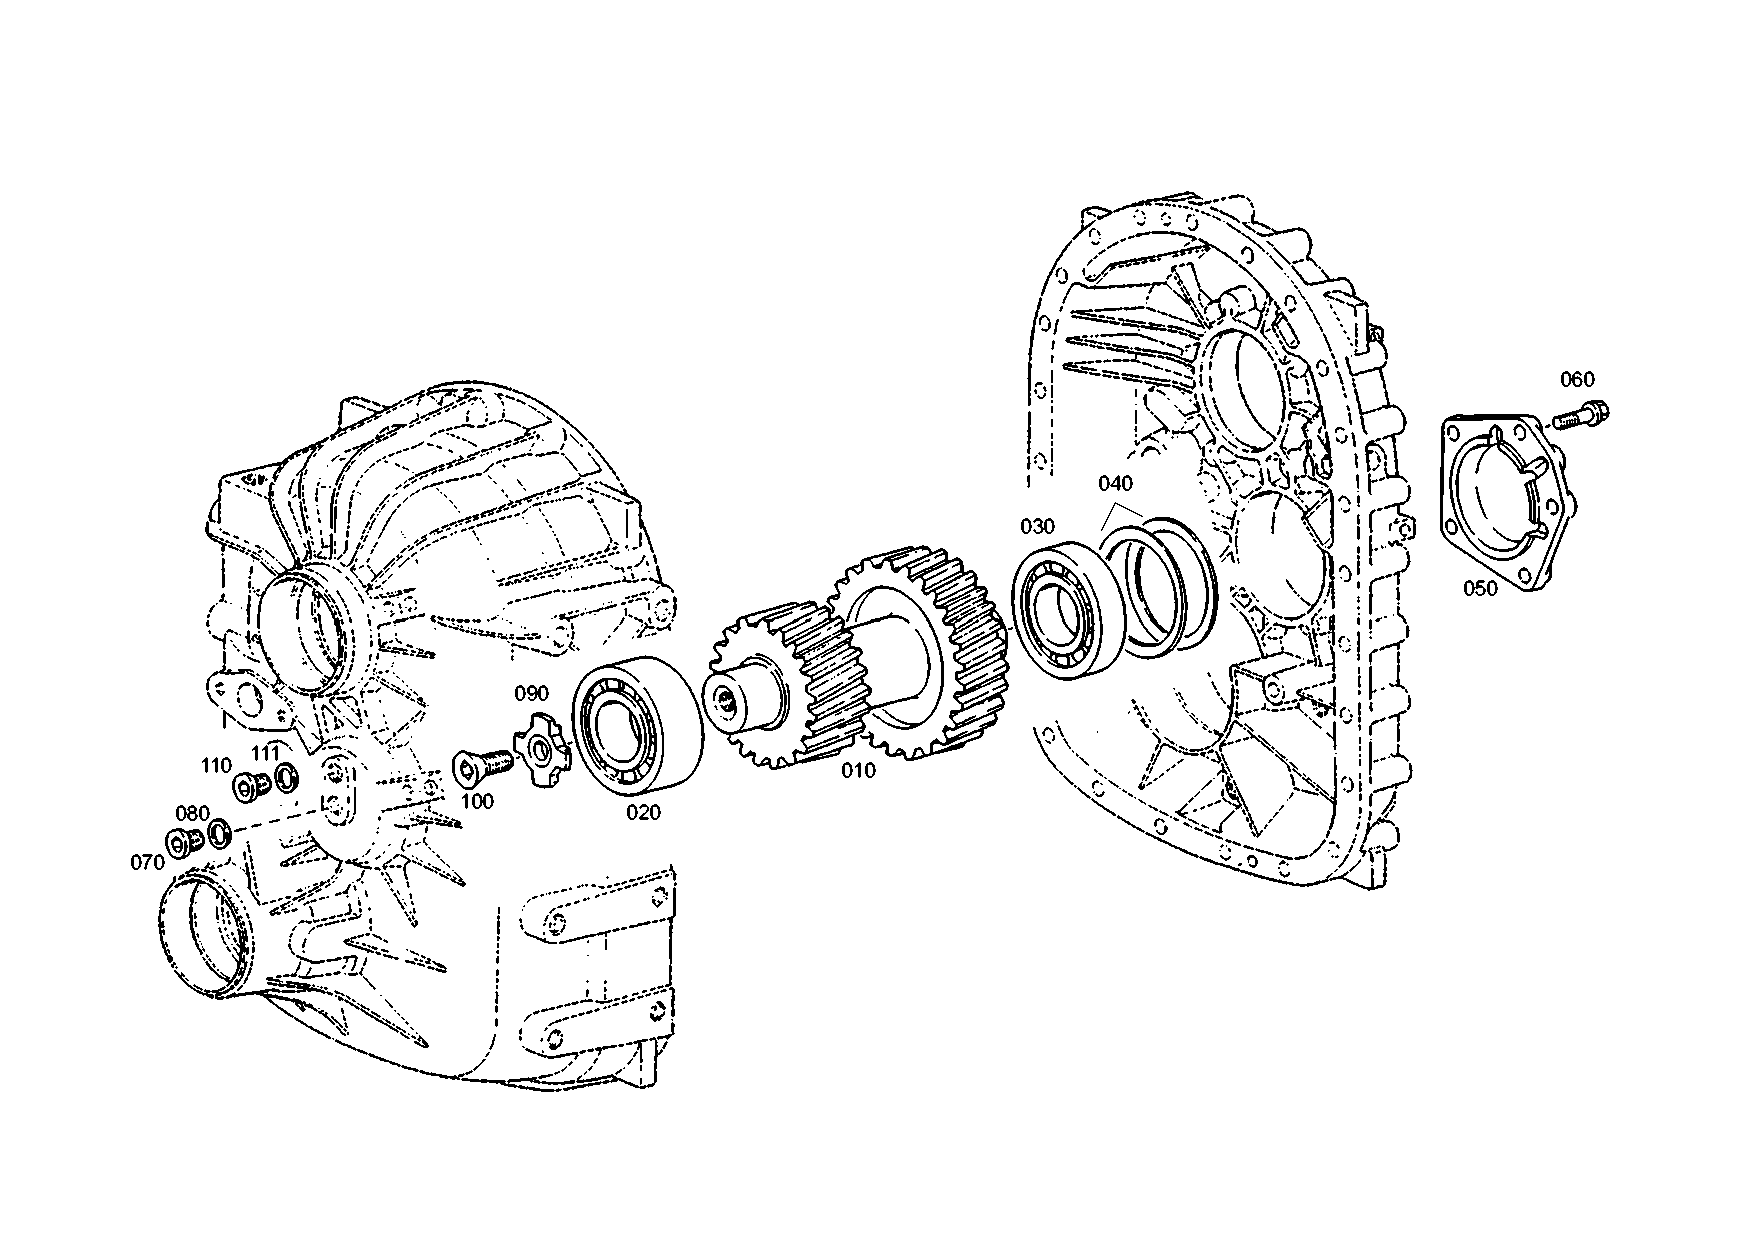 drawing for MARMON Herring MVG751061 - DOUBLE GEAR (figure 1)